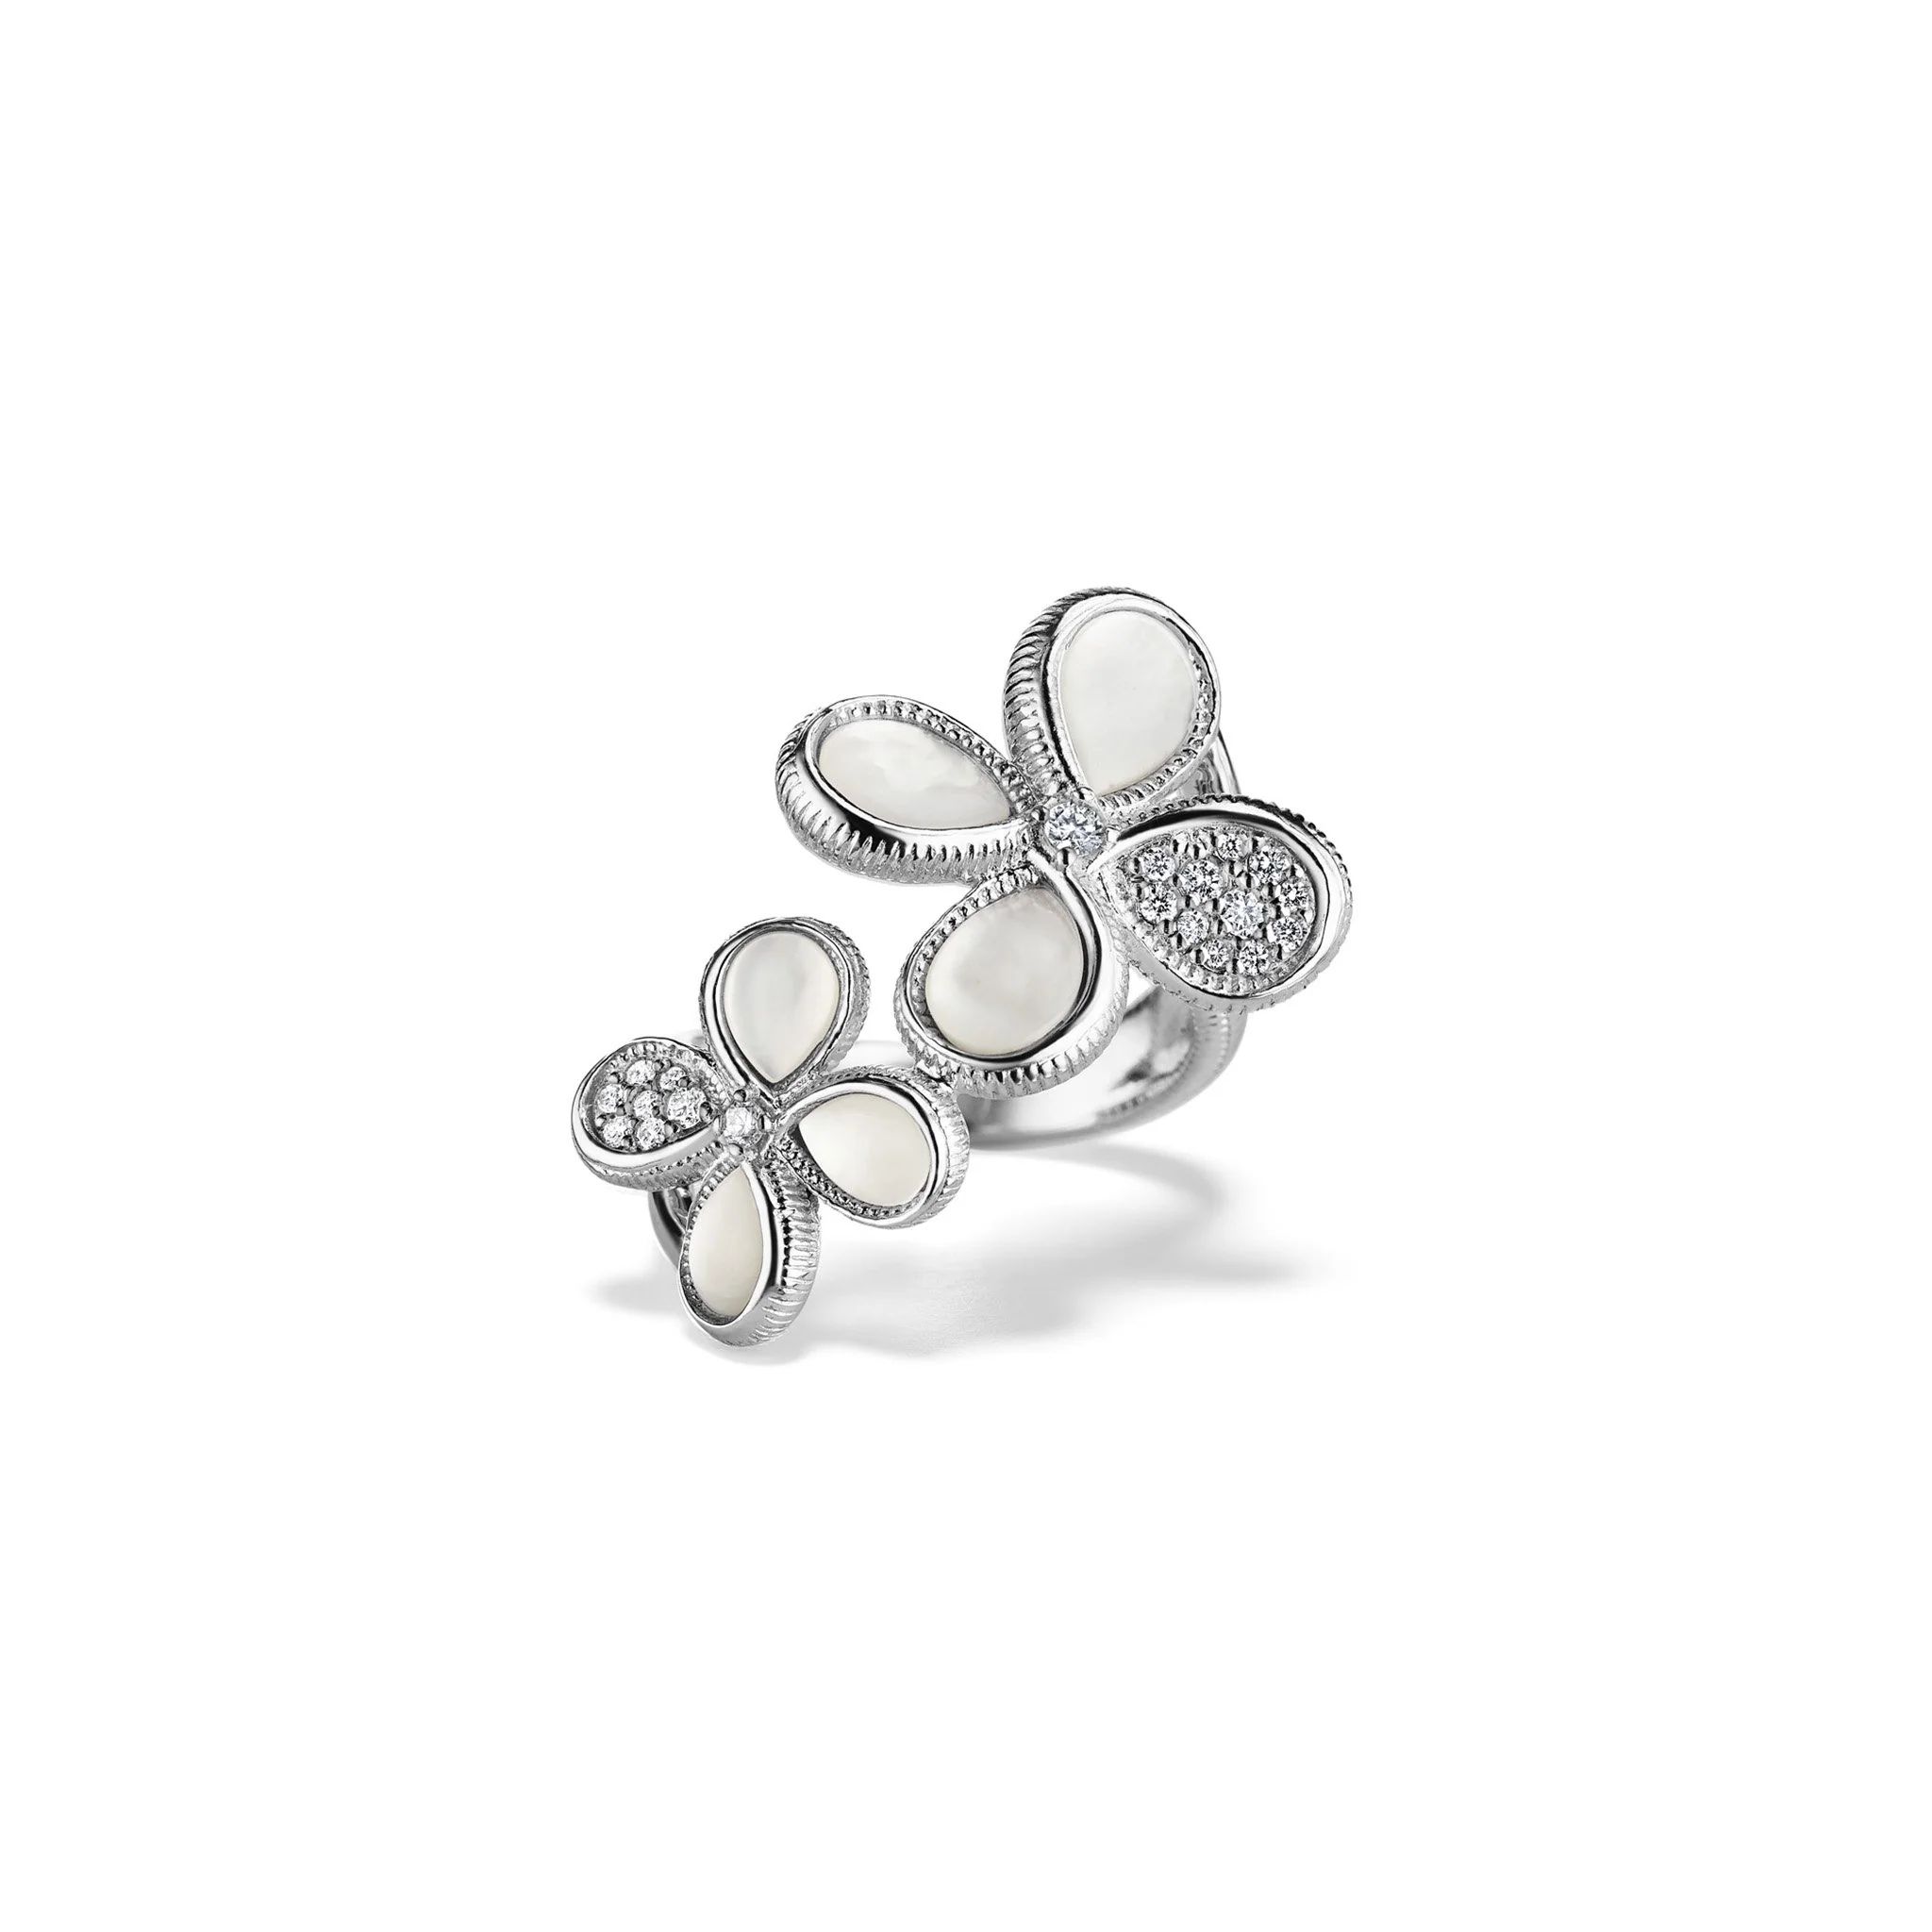 Jardin Double Flower Ring with Mother of Pearl and Diamonds | Judith Ripka 